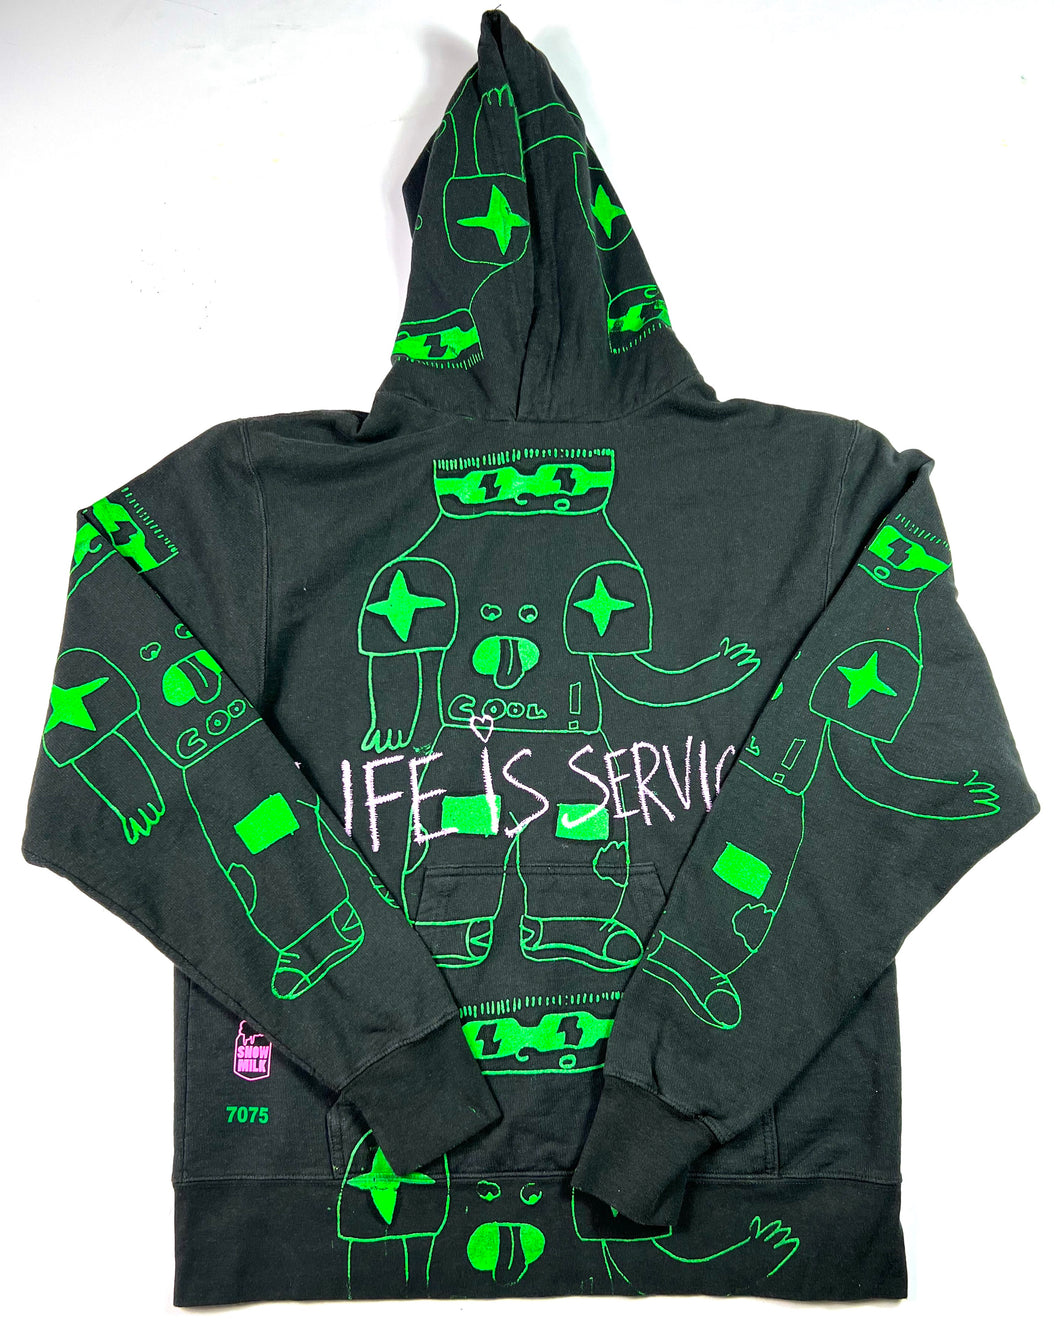 Cool Kid Life Is Service Hoodie (Size Small)